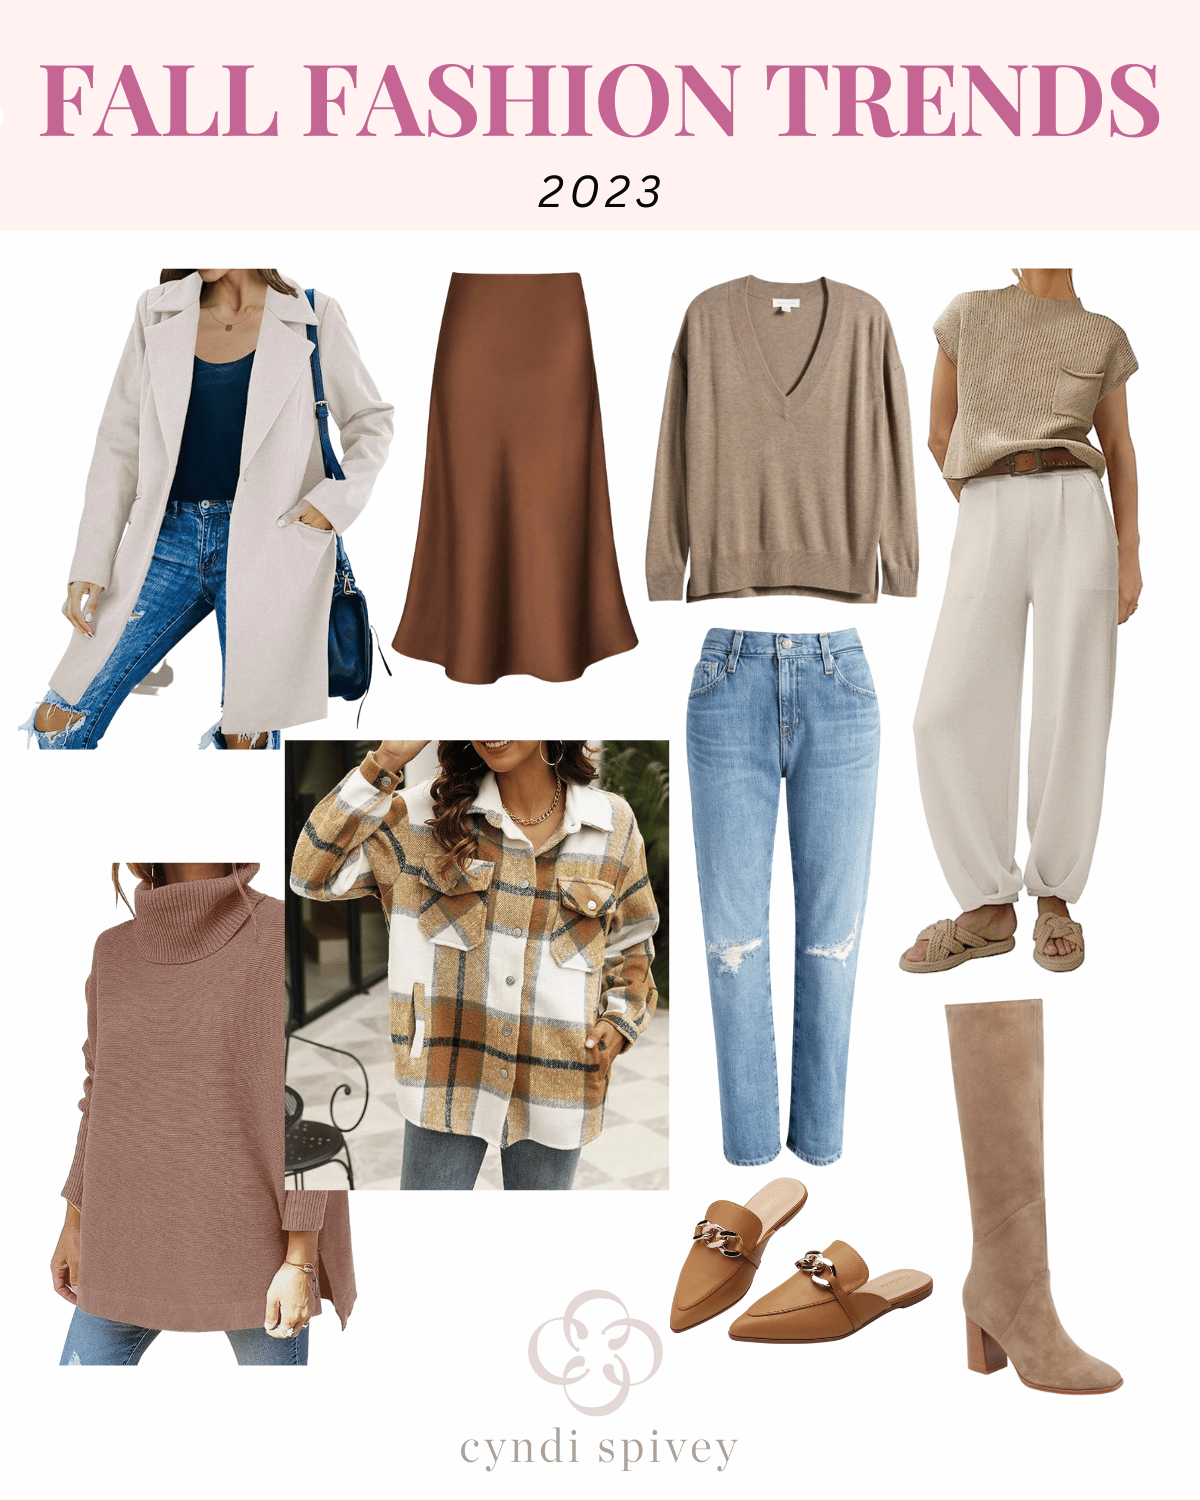 fall fashion trends 2023, viral fall clothing, fall closet basics, casual fall outfit ideas, casual fall looks, fall outfit ideas, trendy fall looks, fall must haves 